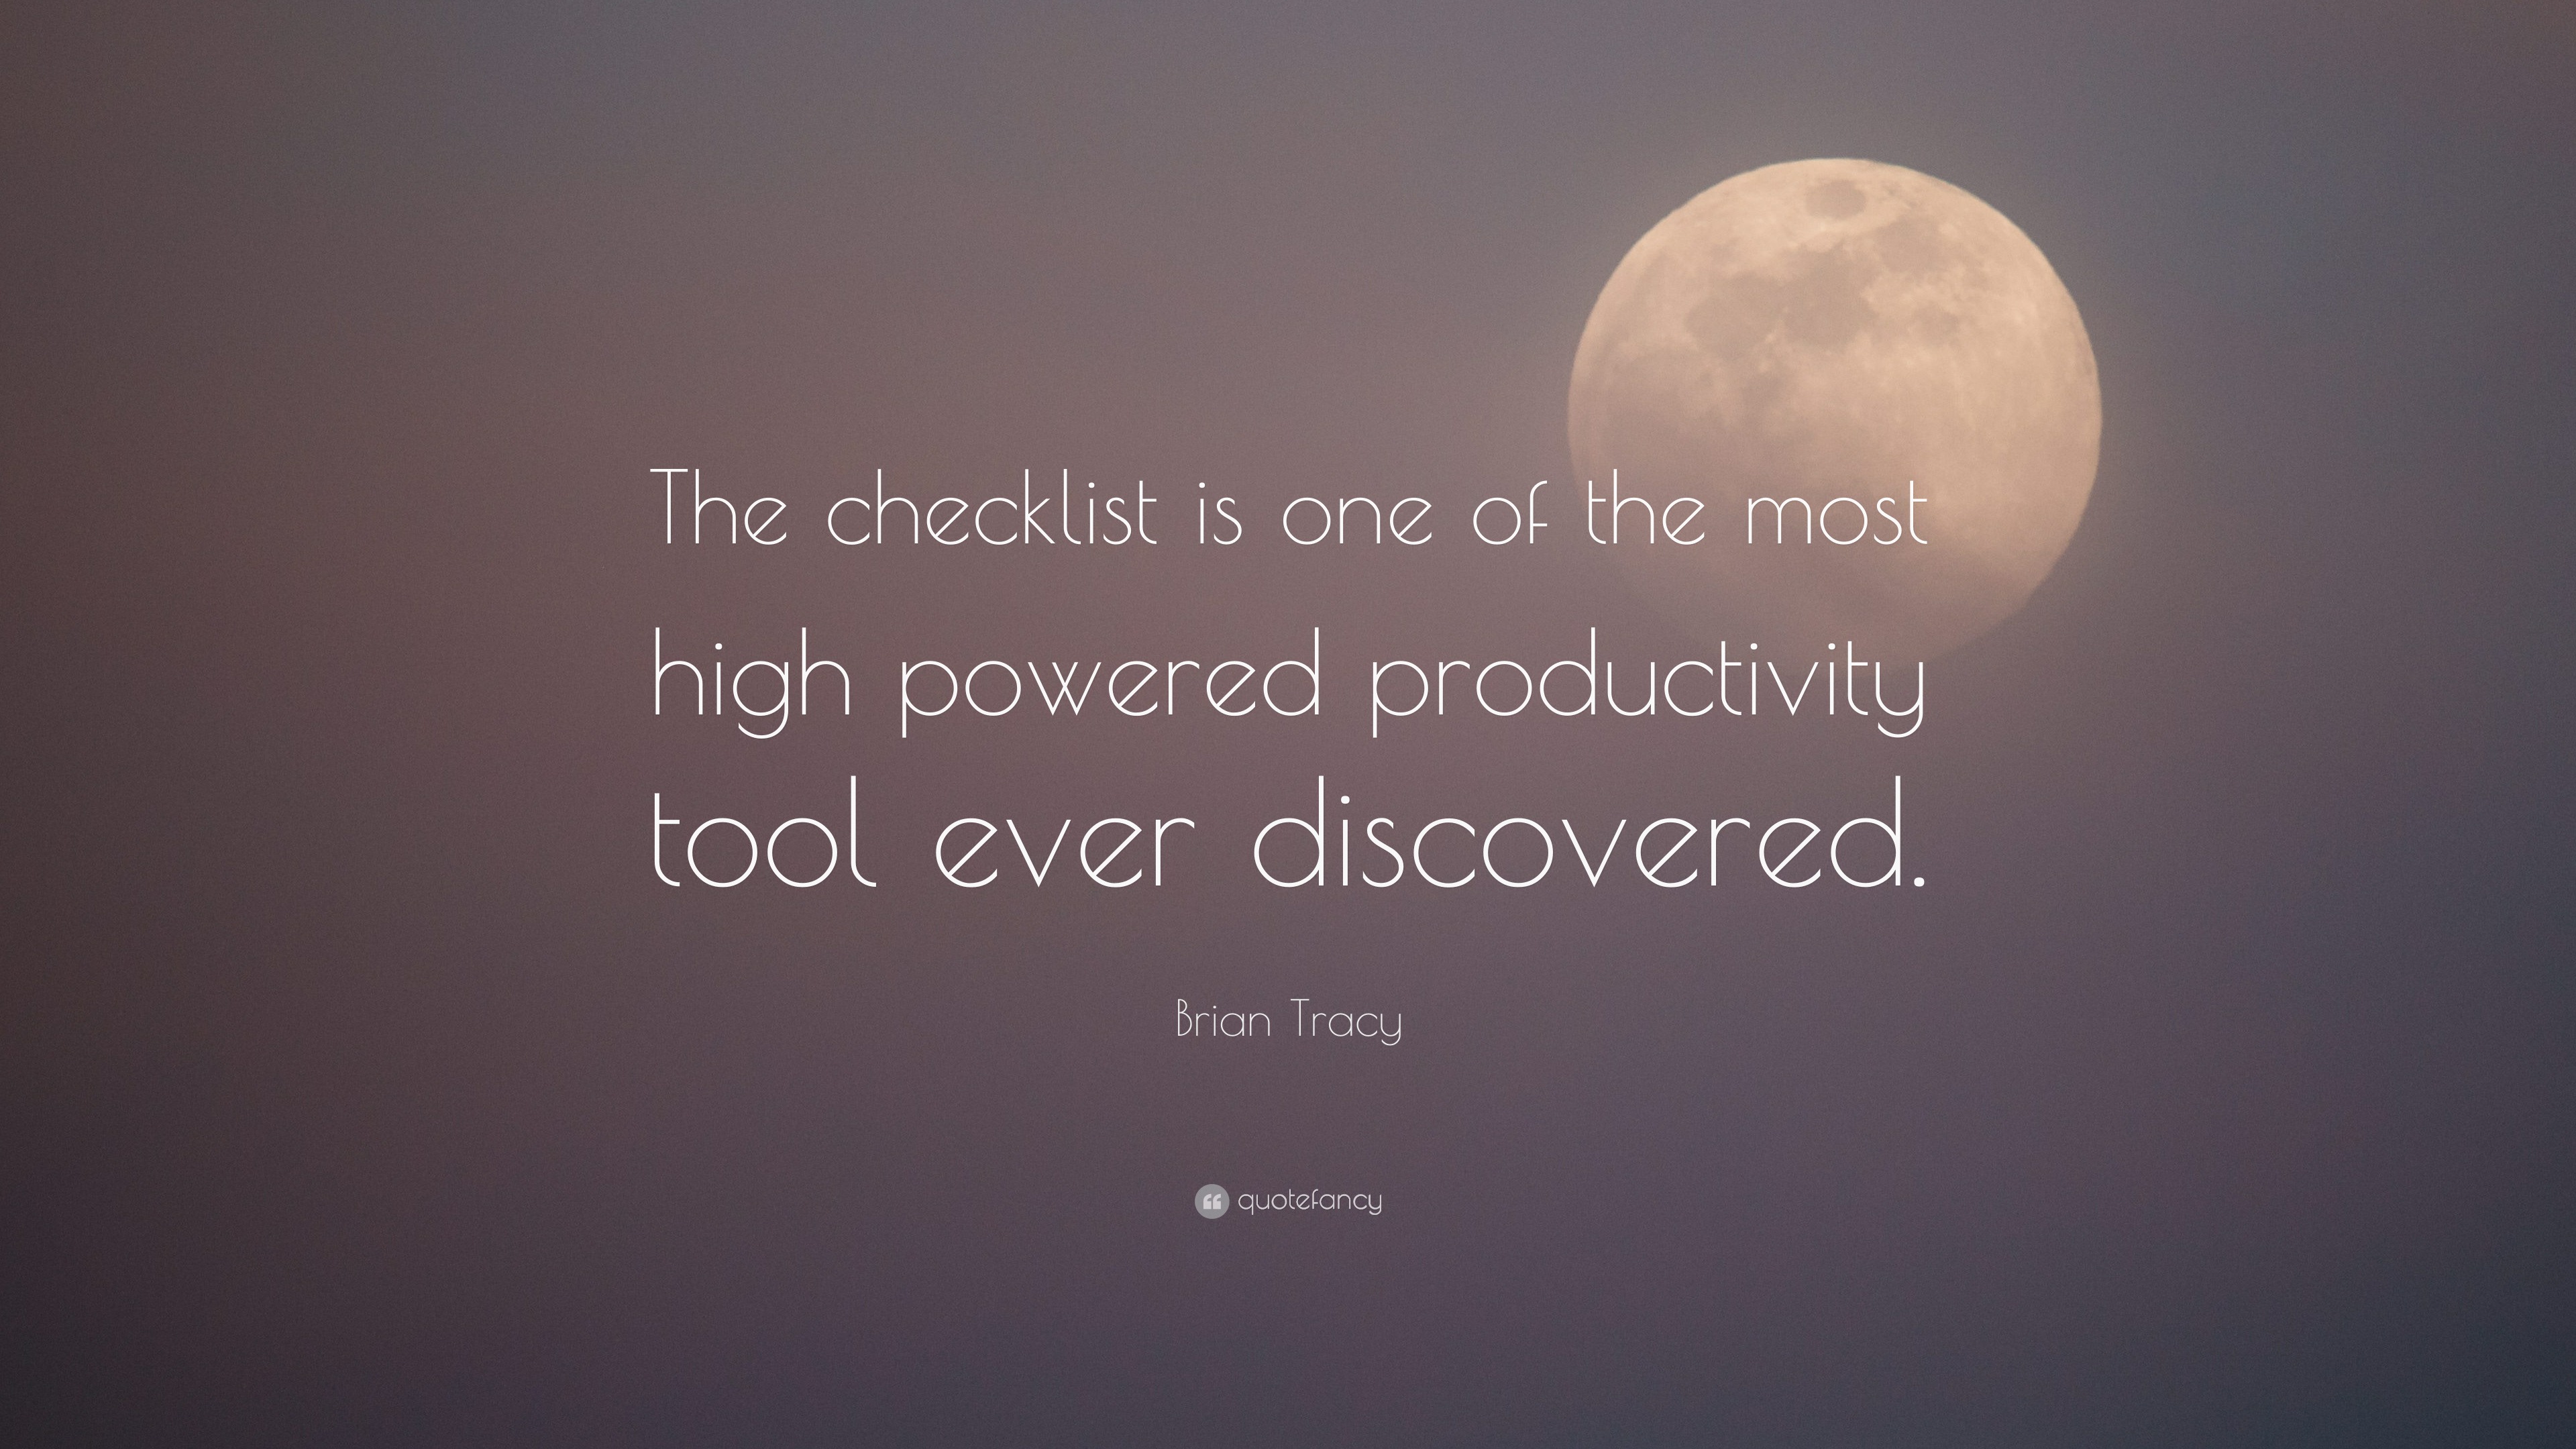 Brian Tracy Quote: “The checklist is one of the most high powered